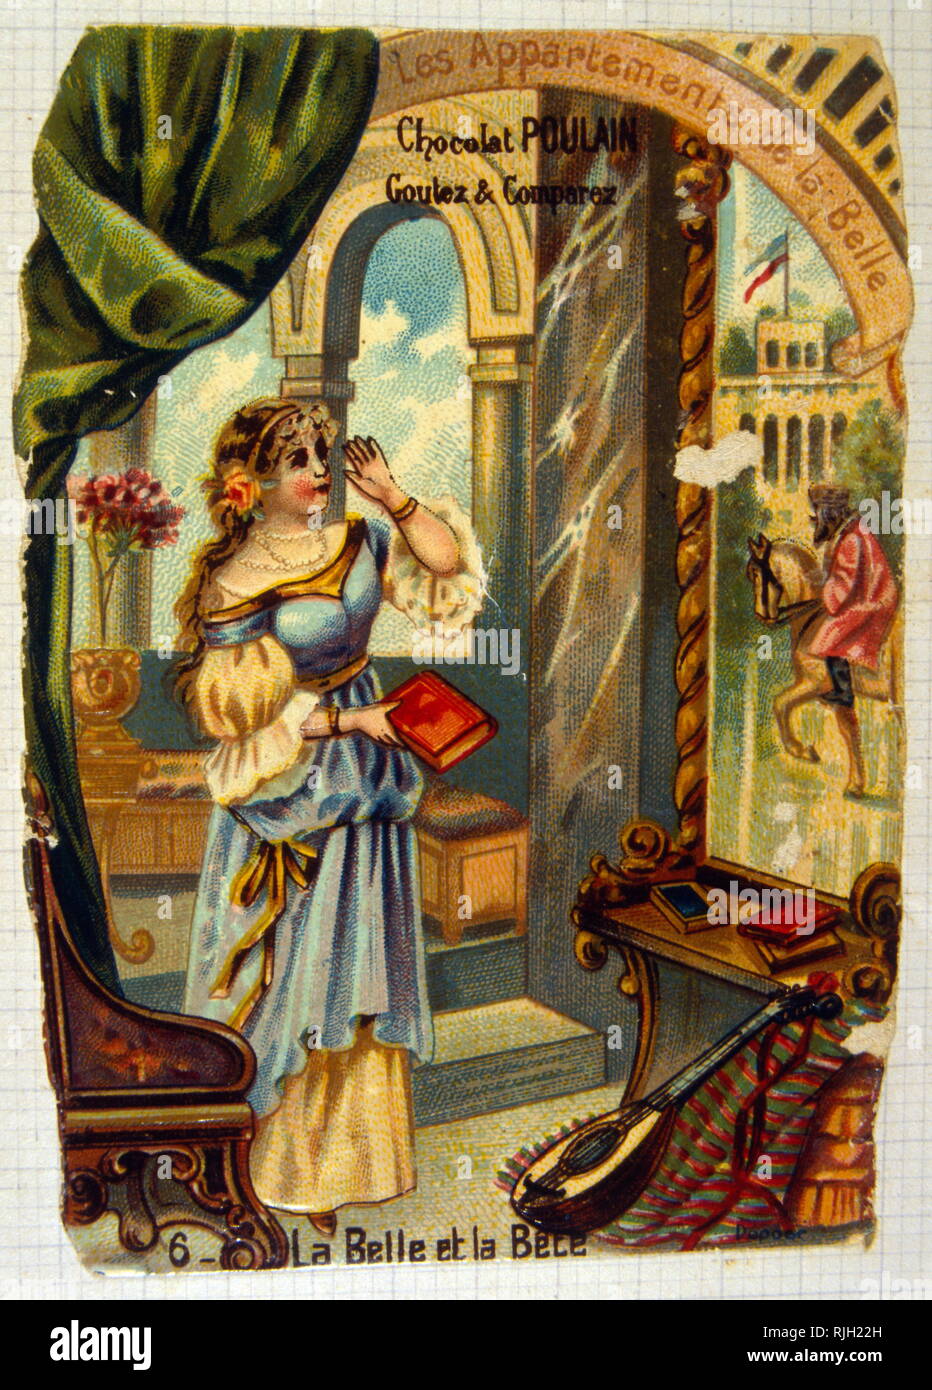 French, Chromolithograph illustration depicting Beauty and the Beast 1885 Stock Photo